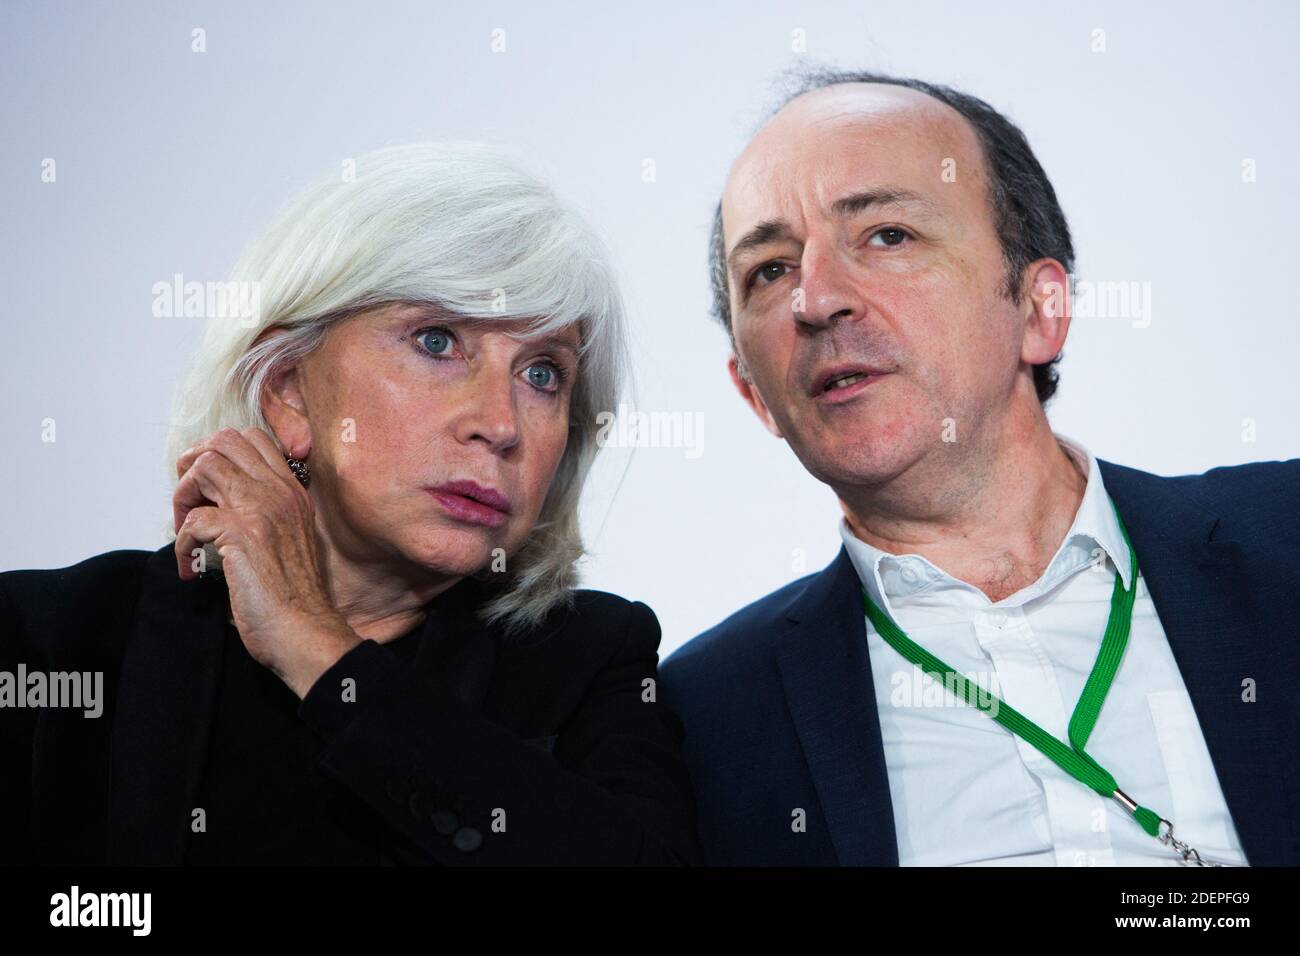 Economist Laurence Tubiana and CEO of Terra Nova Thierry Pech at the Citizens' Convention for Climate held at the French Conseil economique, social et environnemental (CESE - Economic, Social and Environmental Council) in Paris, 04 October 2019. Photo by Raphaël Lafargue/ABACAPRESS.COM Stock Photo